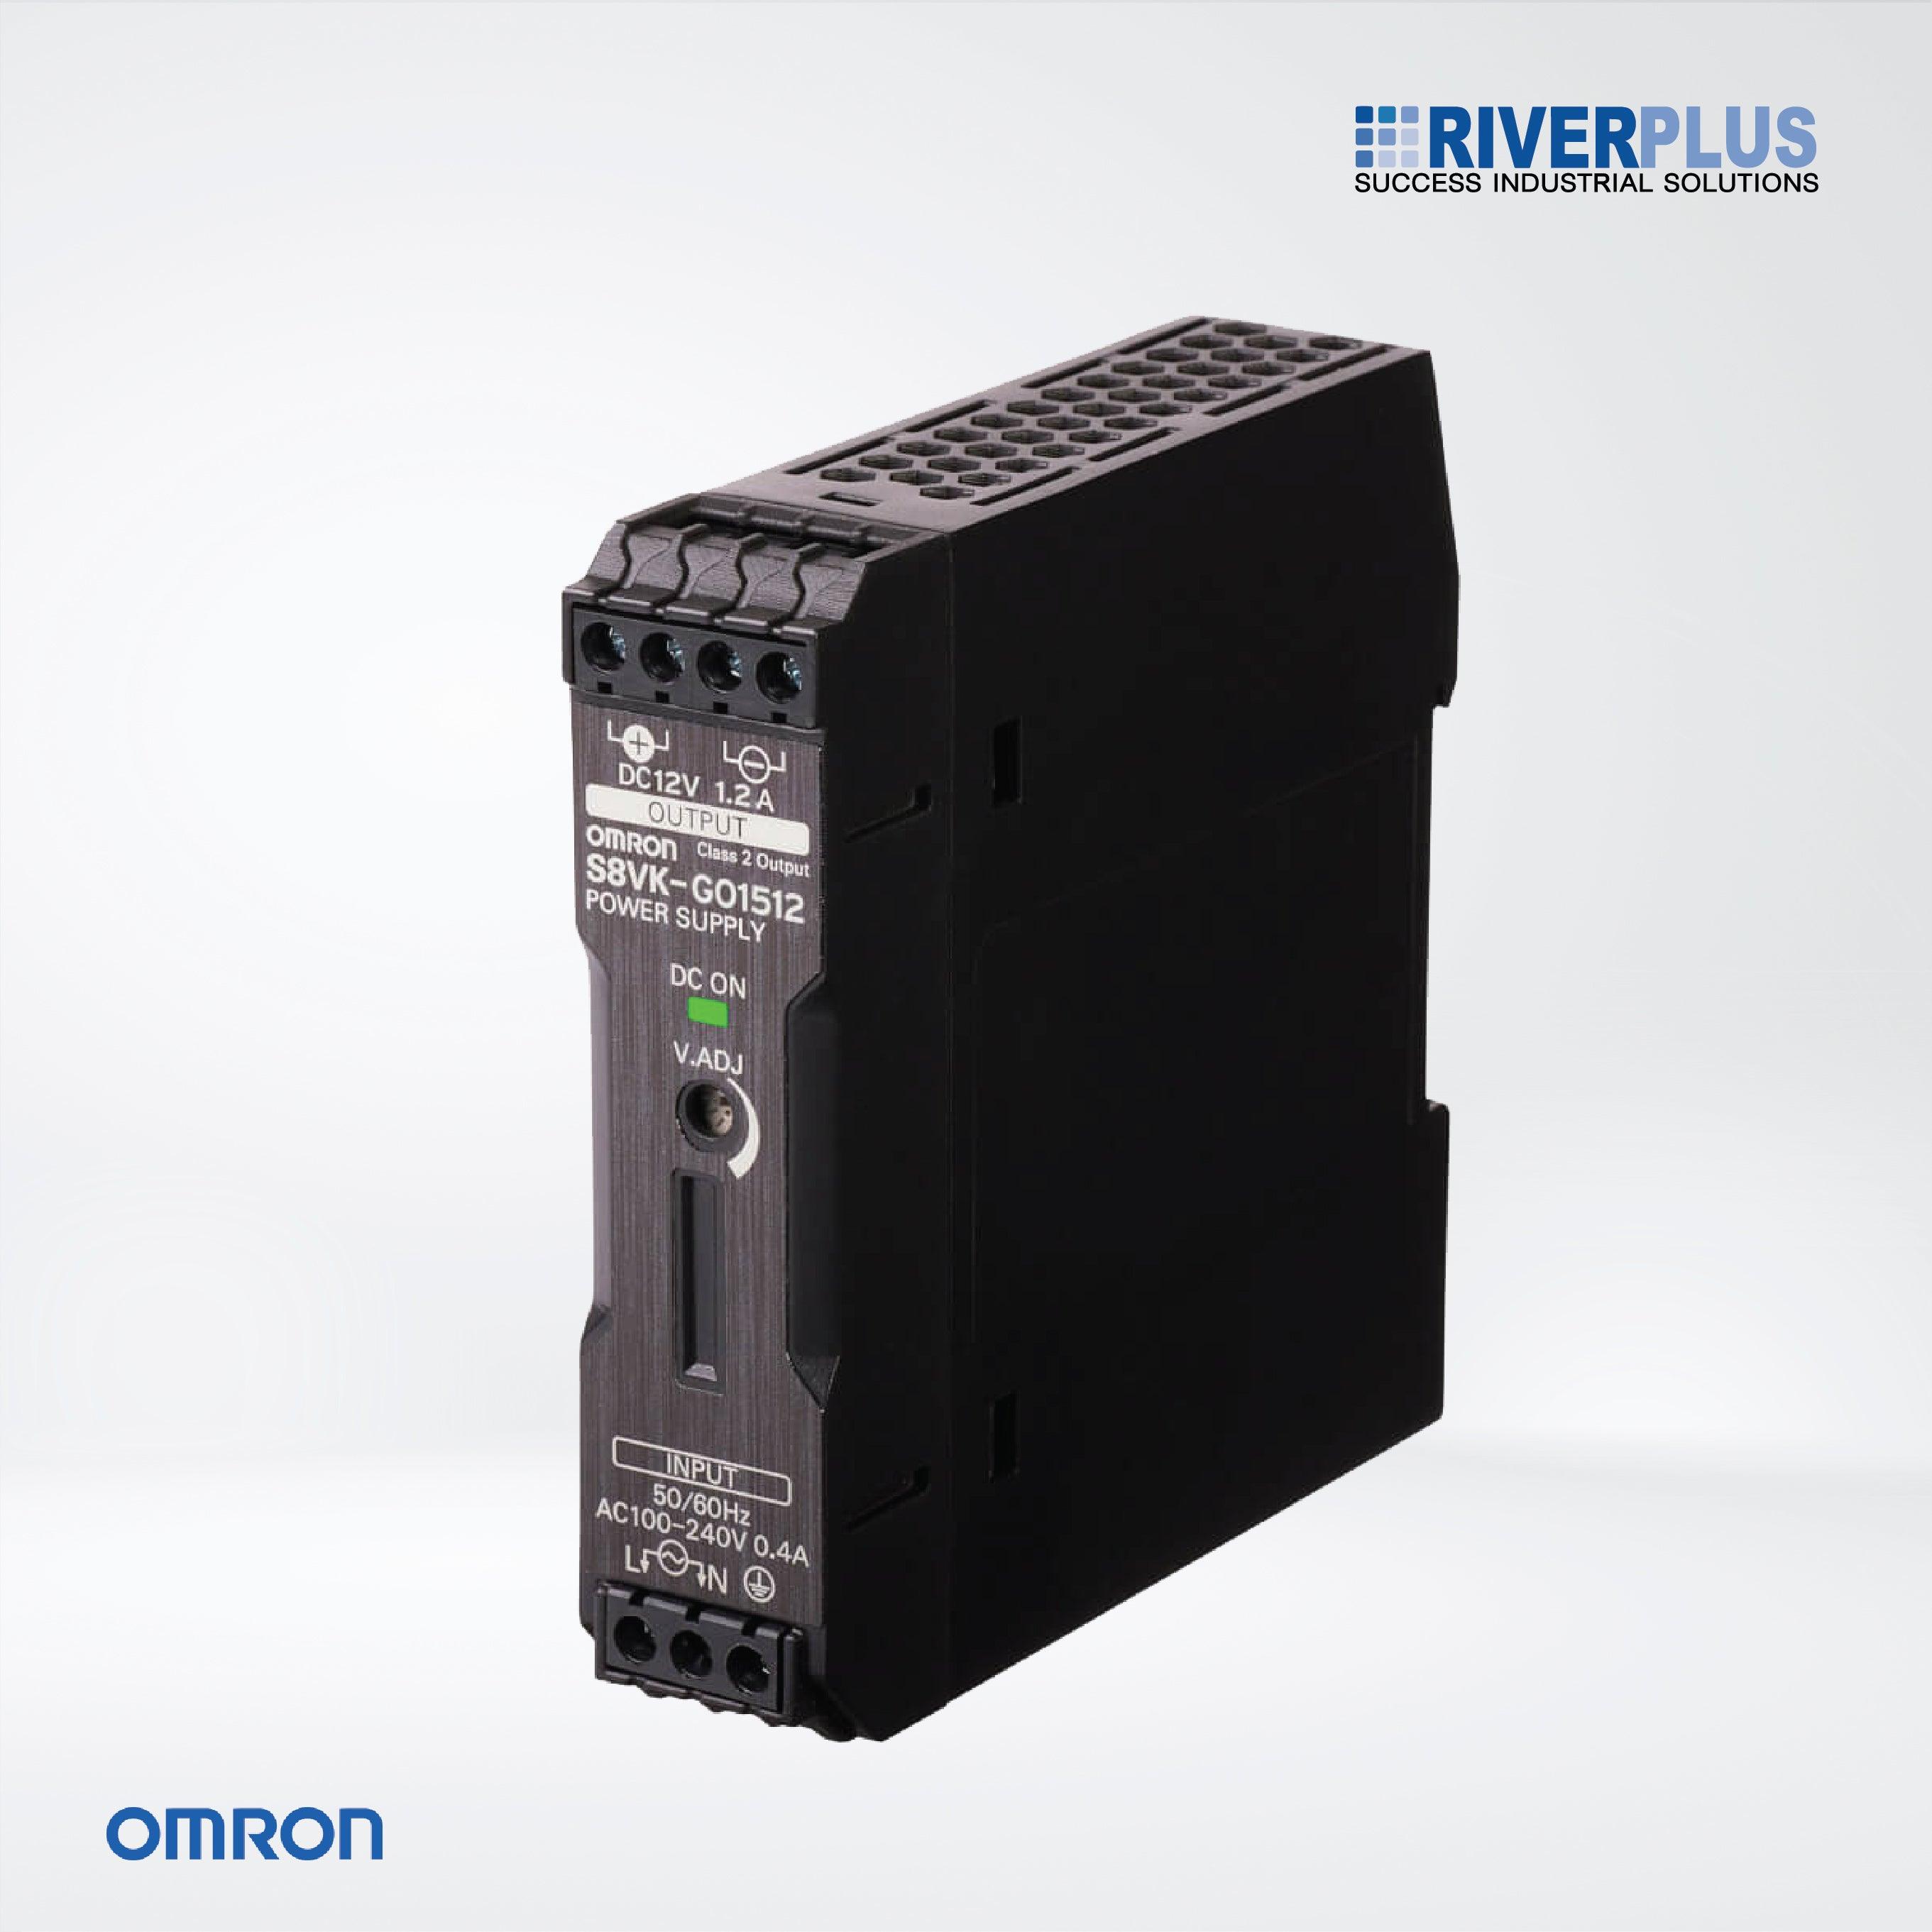 S8VK-G01505 Switch Mode Power Supply , 15W , 5VDC , standard with single-phase input - Riverplus